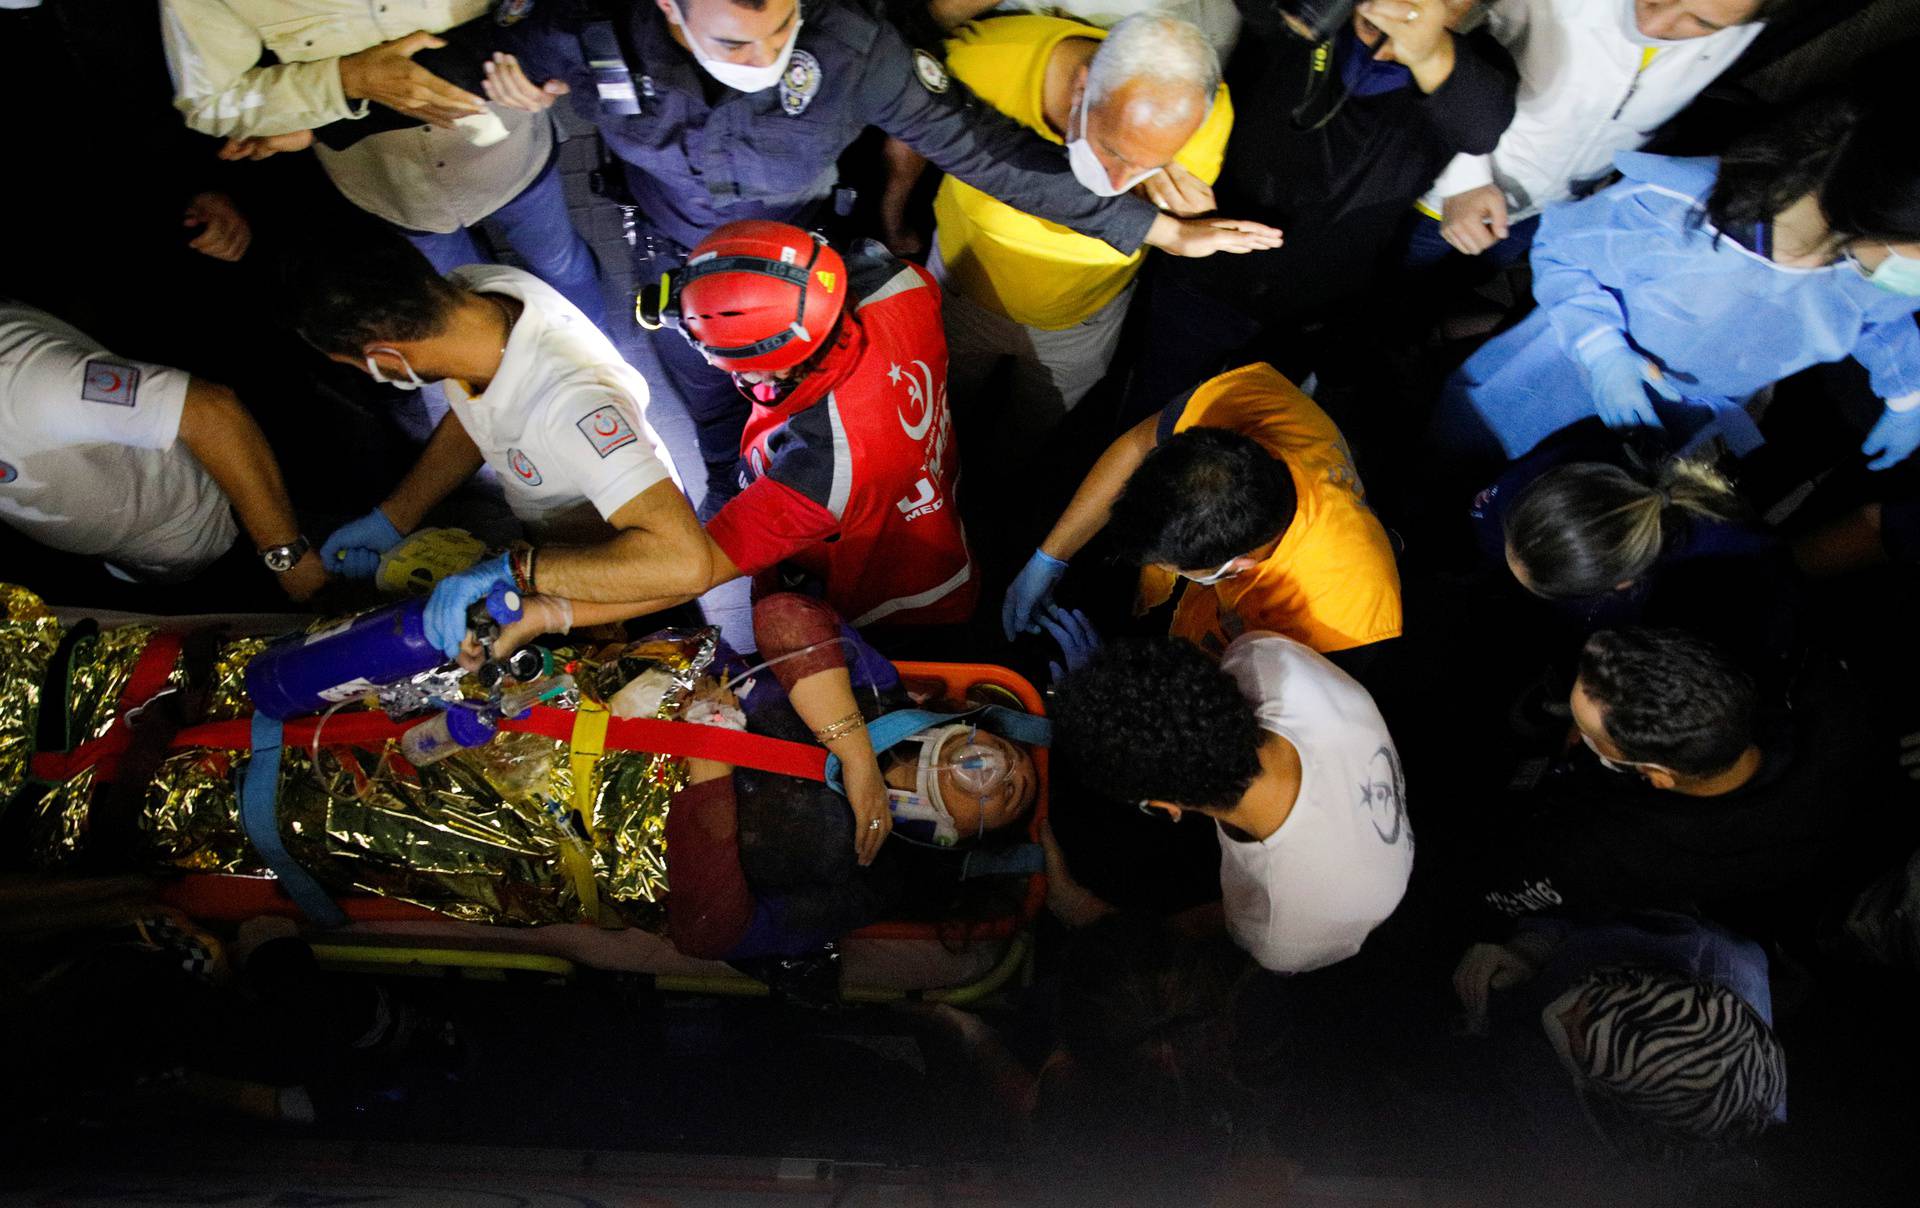 Rescue operations take place on a site after an earthquake struck the Aegean Sea, in the coastal province of Izmir